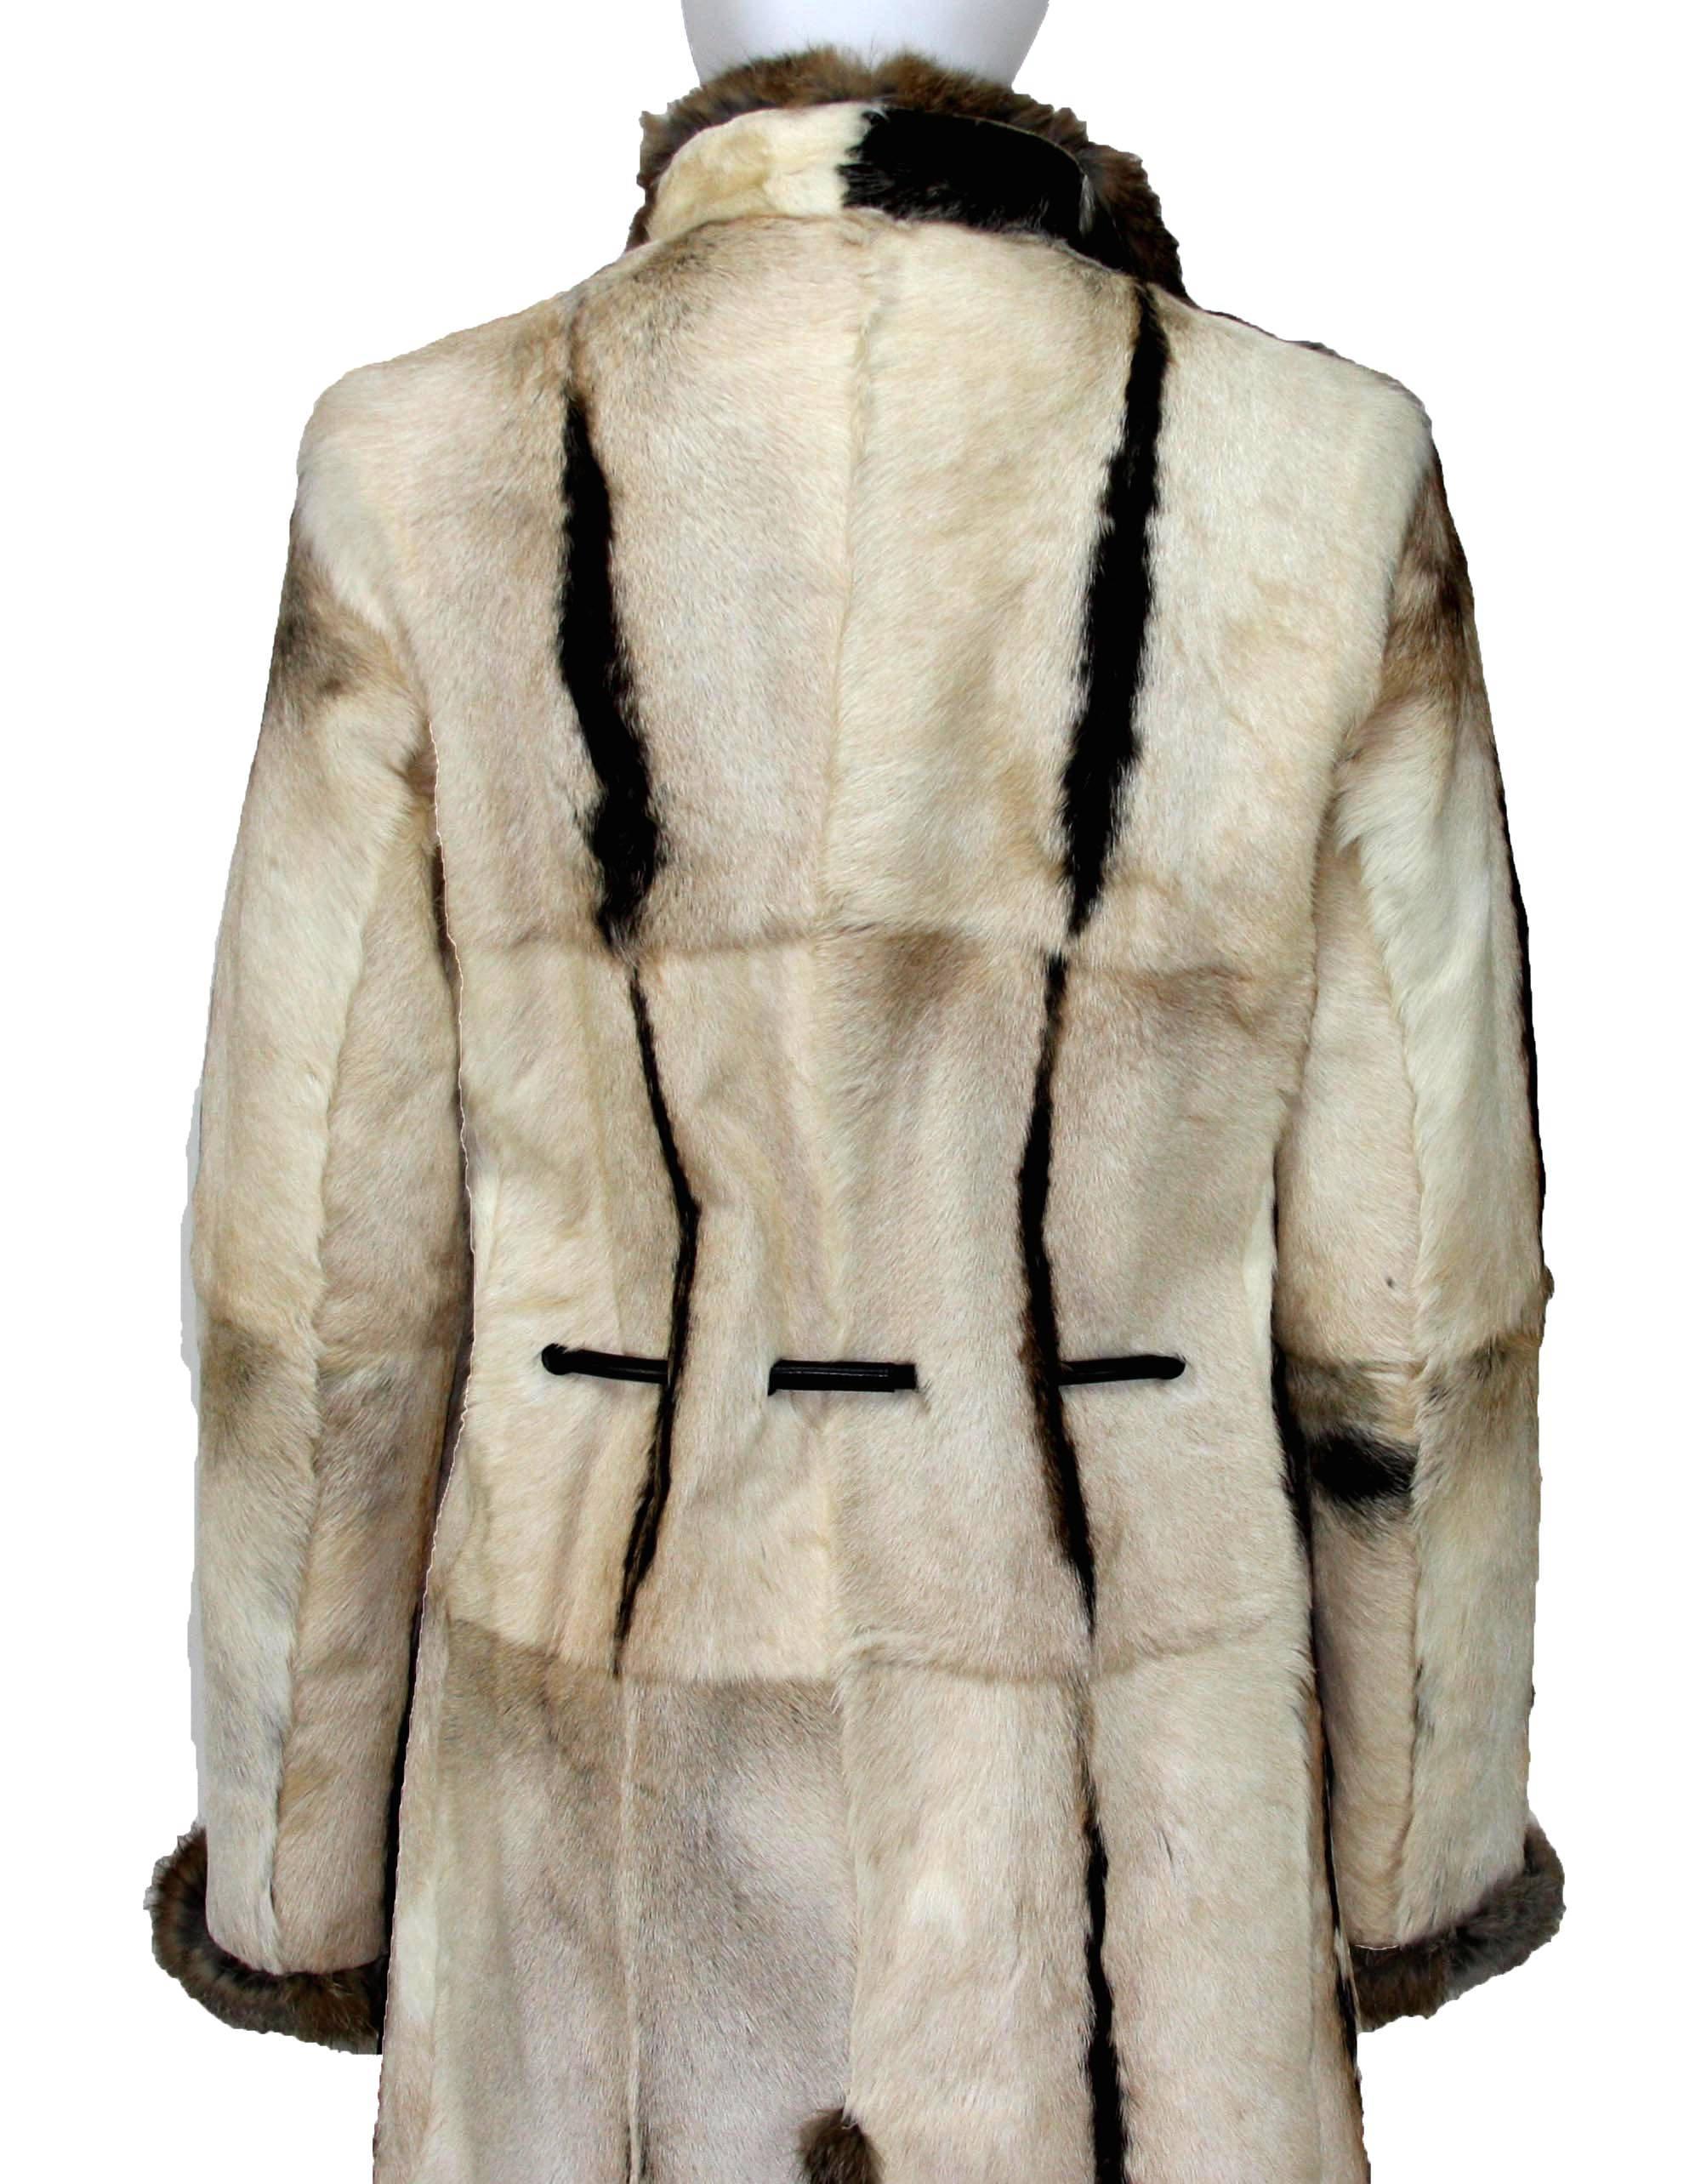 New Tom Ford for Gucci 1999 Collection Reversible Beige Fur Coat It.44 1